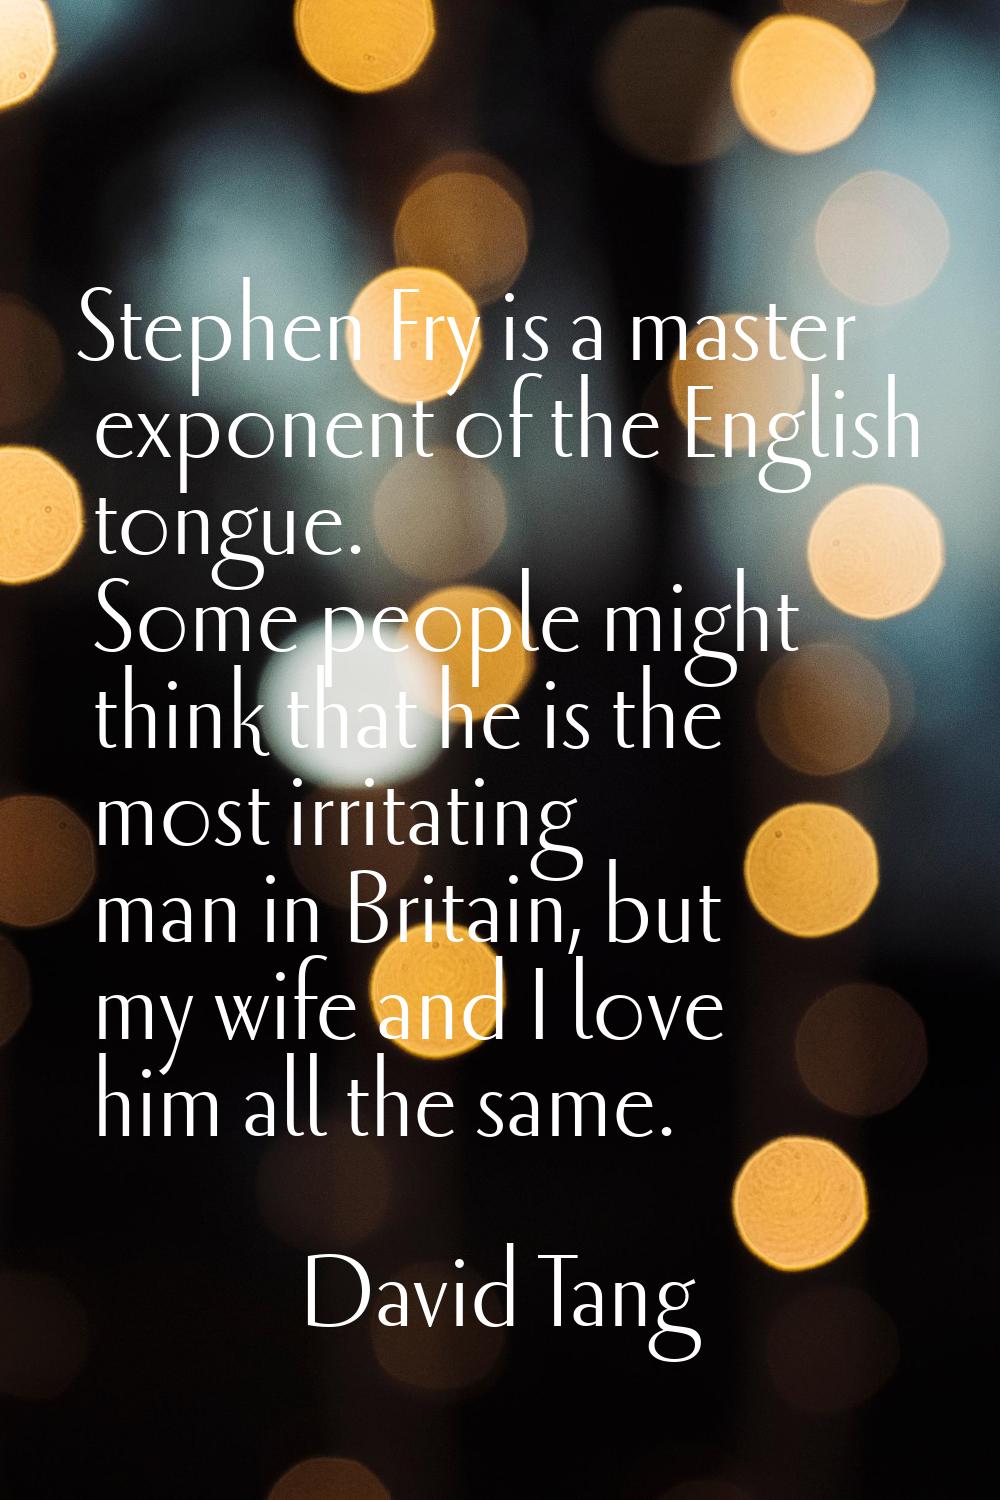 Stephen Fry is a master exponent of the English tongue. Some people might think that he is the most